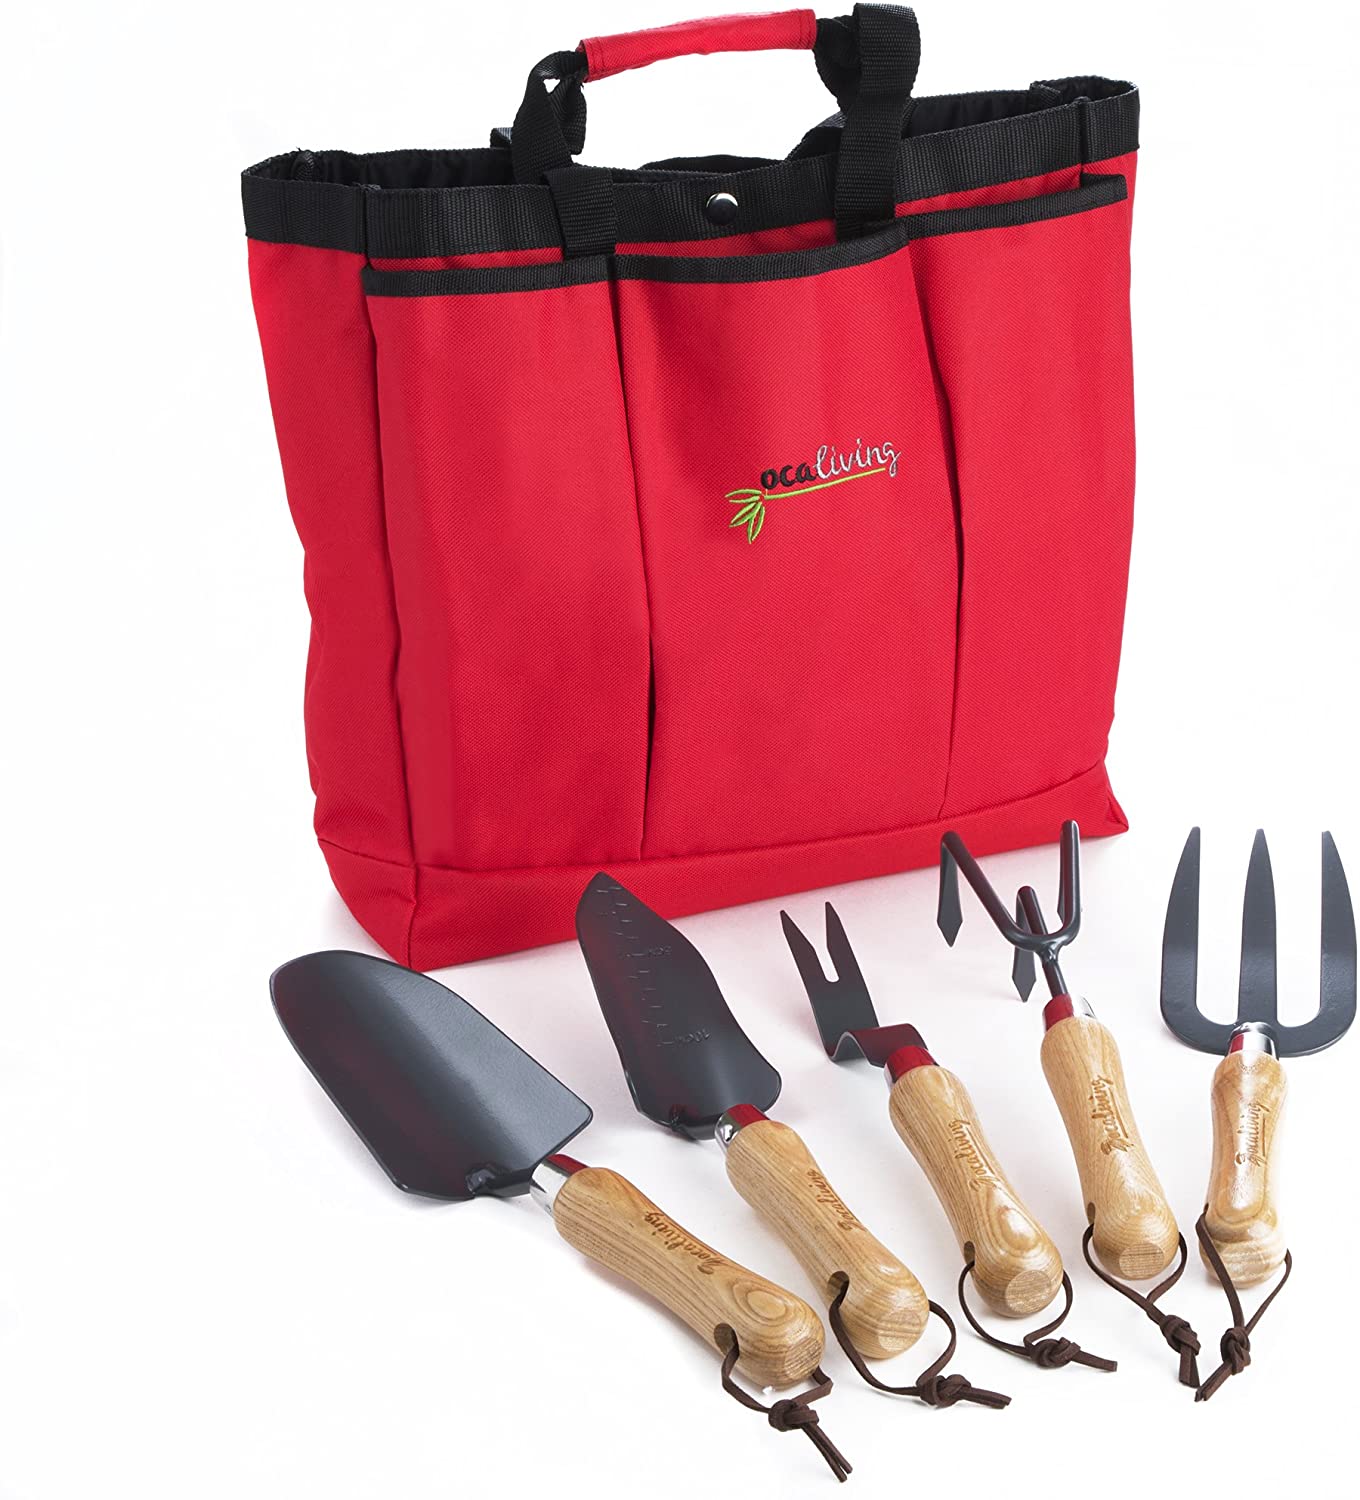 OCALIVING, OCALIVING Garden Tool Set- Gardening Tools -Planting Trowel, Fork, Weeder, Transplanter, Rake and 6 pocket Tote Storage Bag -Heavy Duty Kit for Adults -Gifts for Women and Men -Wood Handle Hand Tools